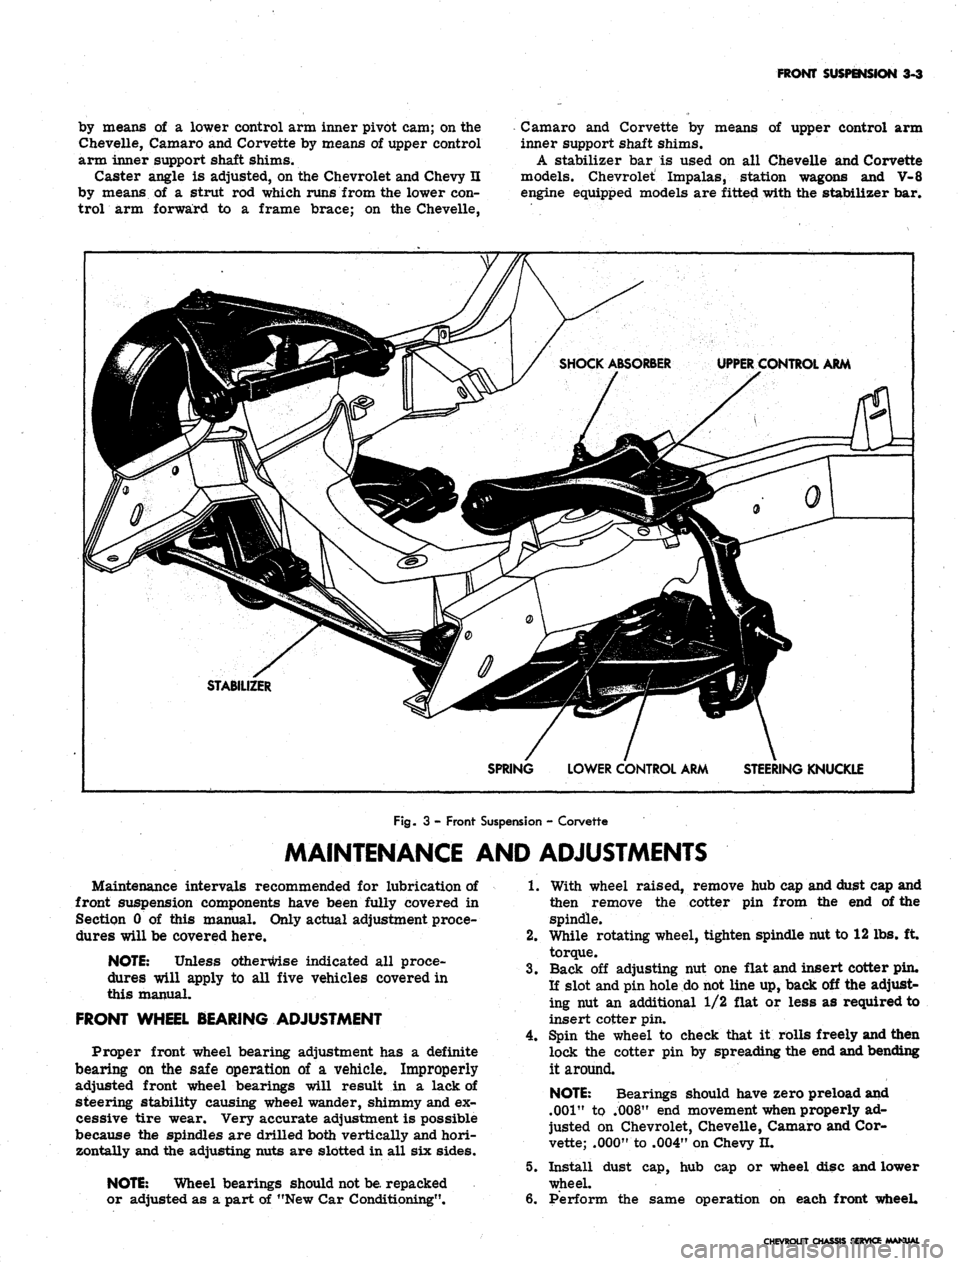 CHEVROLET CAMARO 1967 1.G Chassis User Guide 
FRONT SUSPENSION 3-3

by means of a lower control arm inner pivot cam; on the

Chevelle, Camaro and Corvette by means of upper control

arm inner support shaft shims.

Caster angle is adjusted, on th